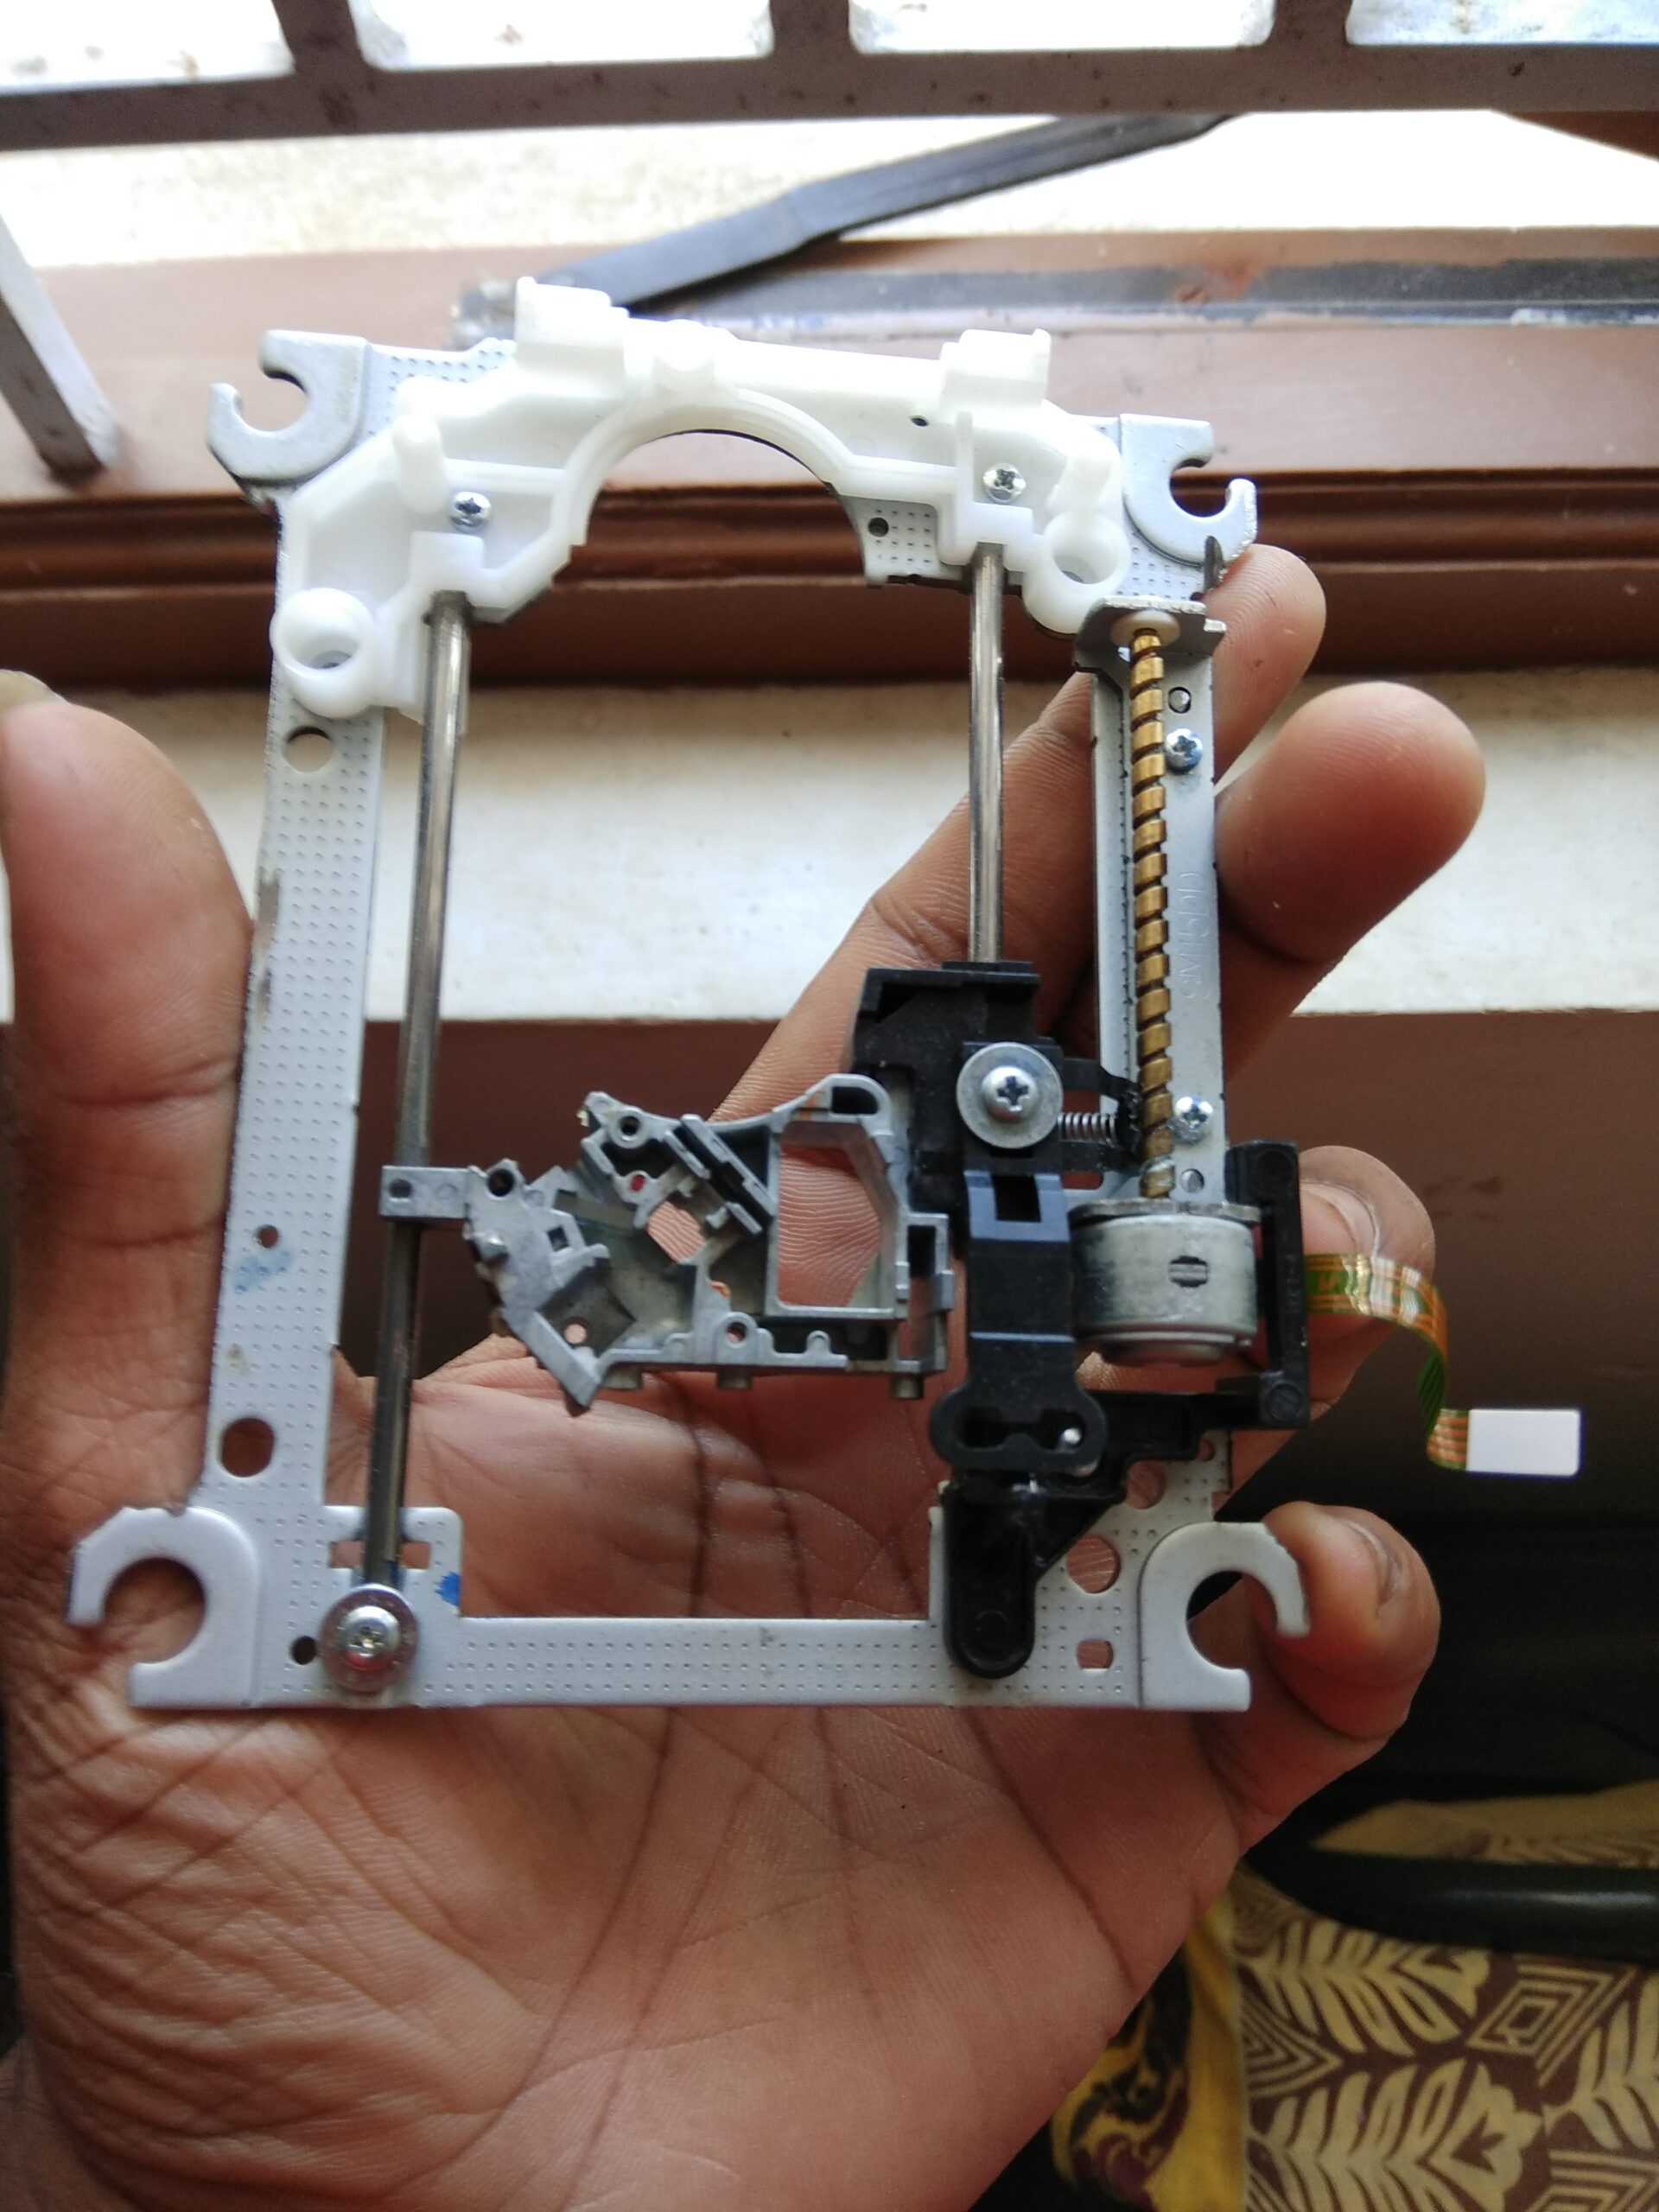 18-YO Student Builds Palm-Sized CNC Machine Using Scrap, For Just Rs 1500